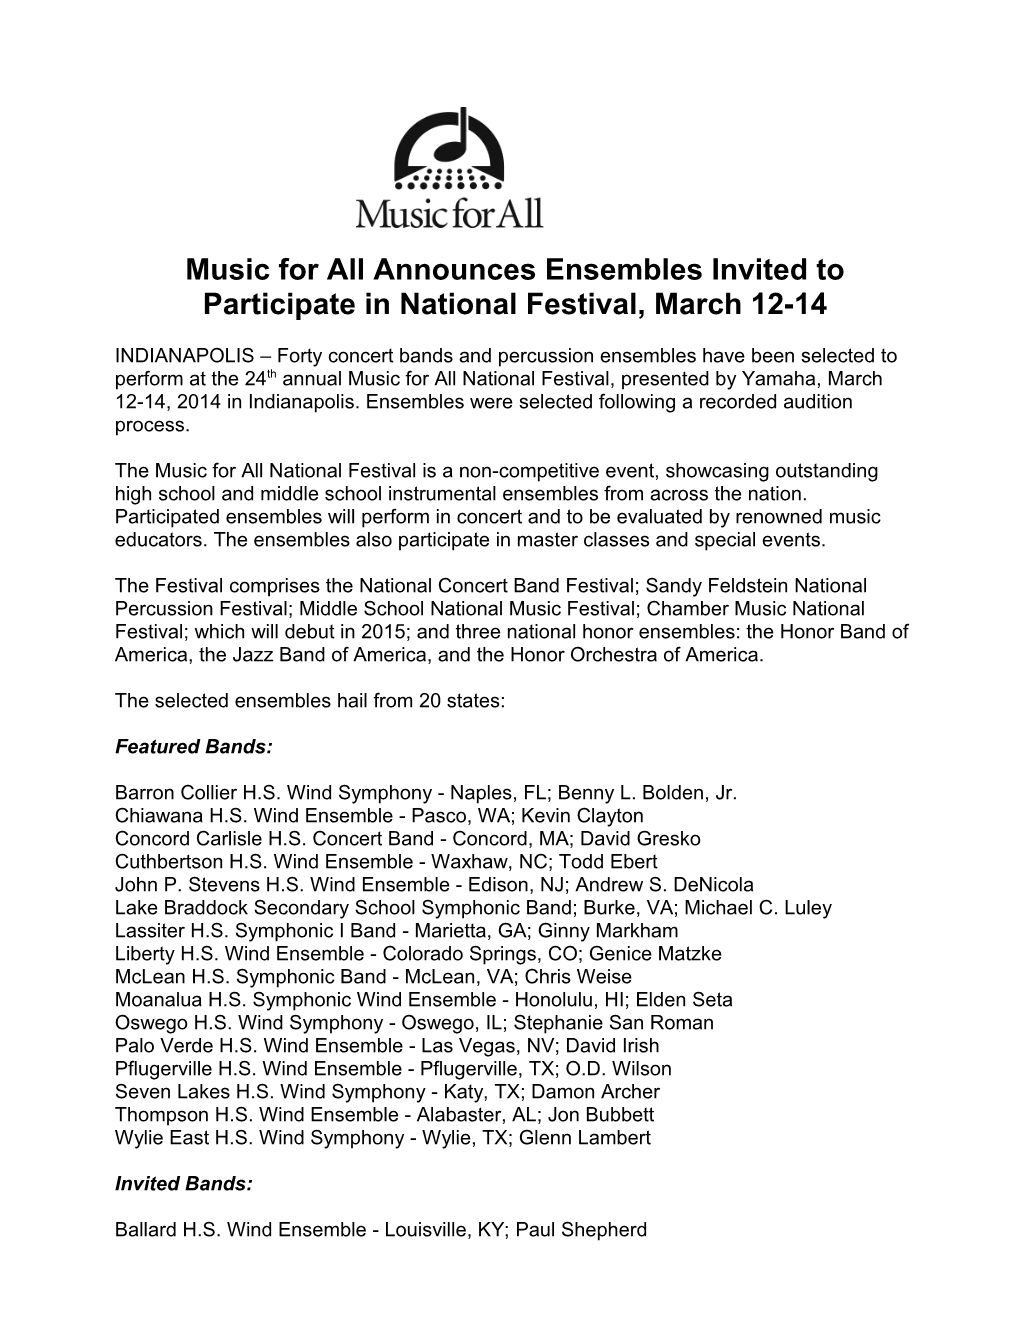 Music for All Announces Ensembles Invited to Participate in National Festival, March 12-14